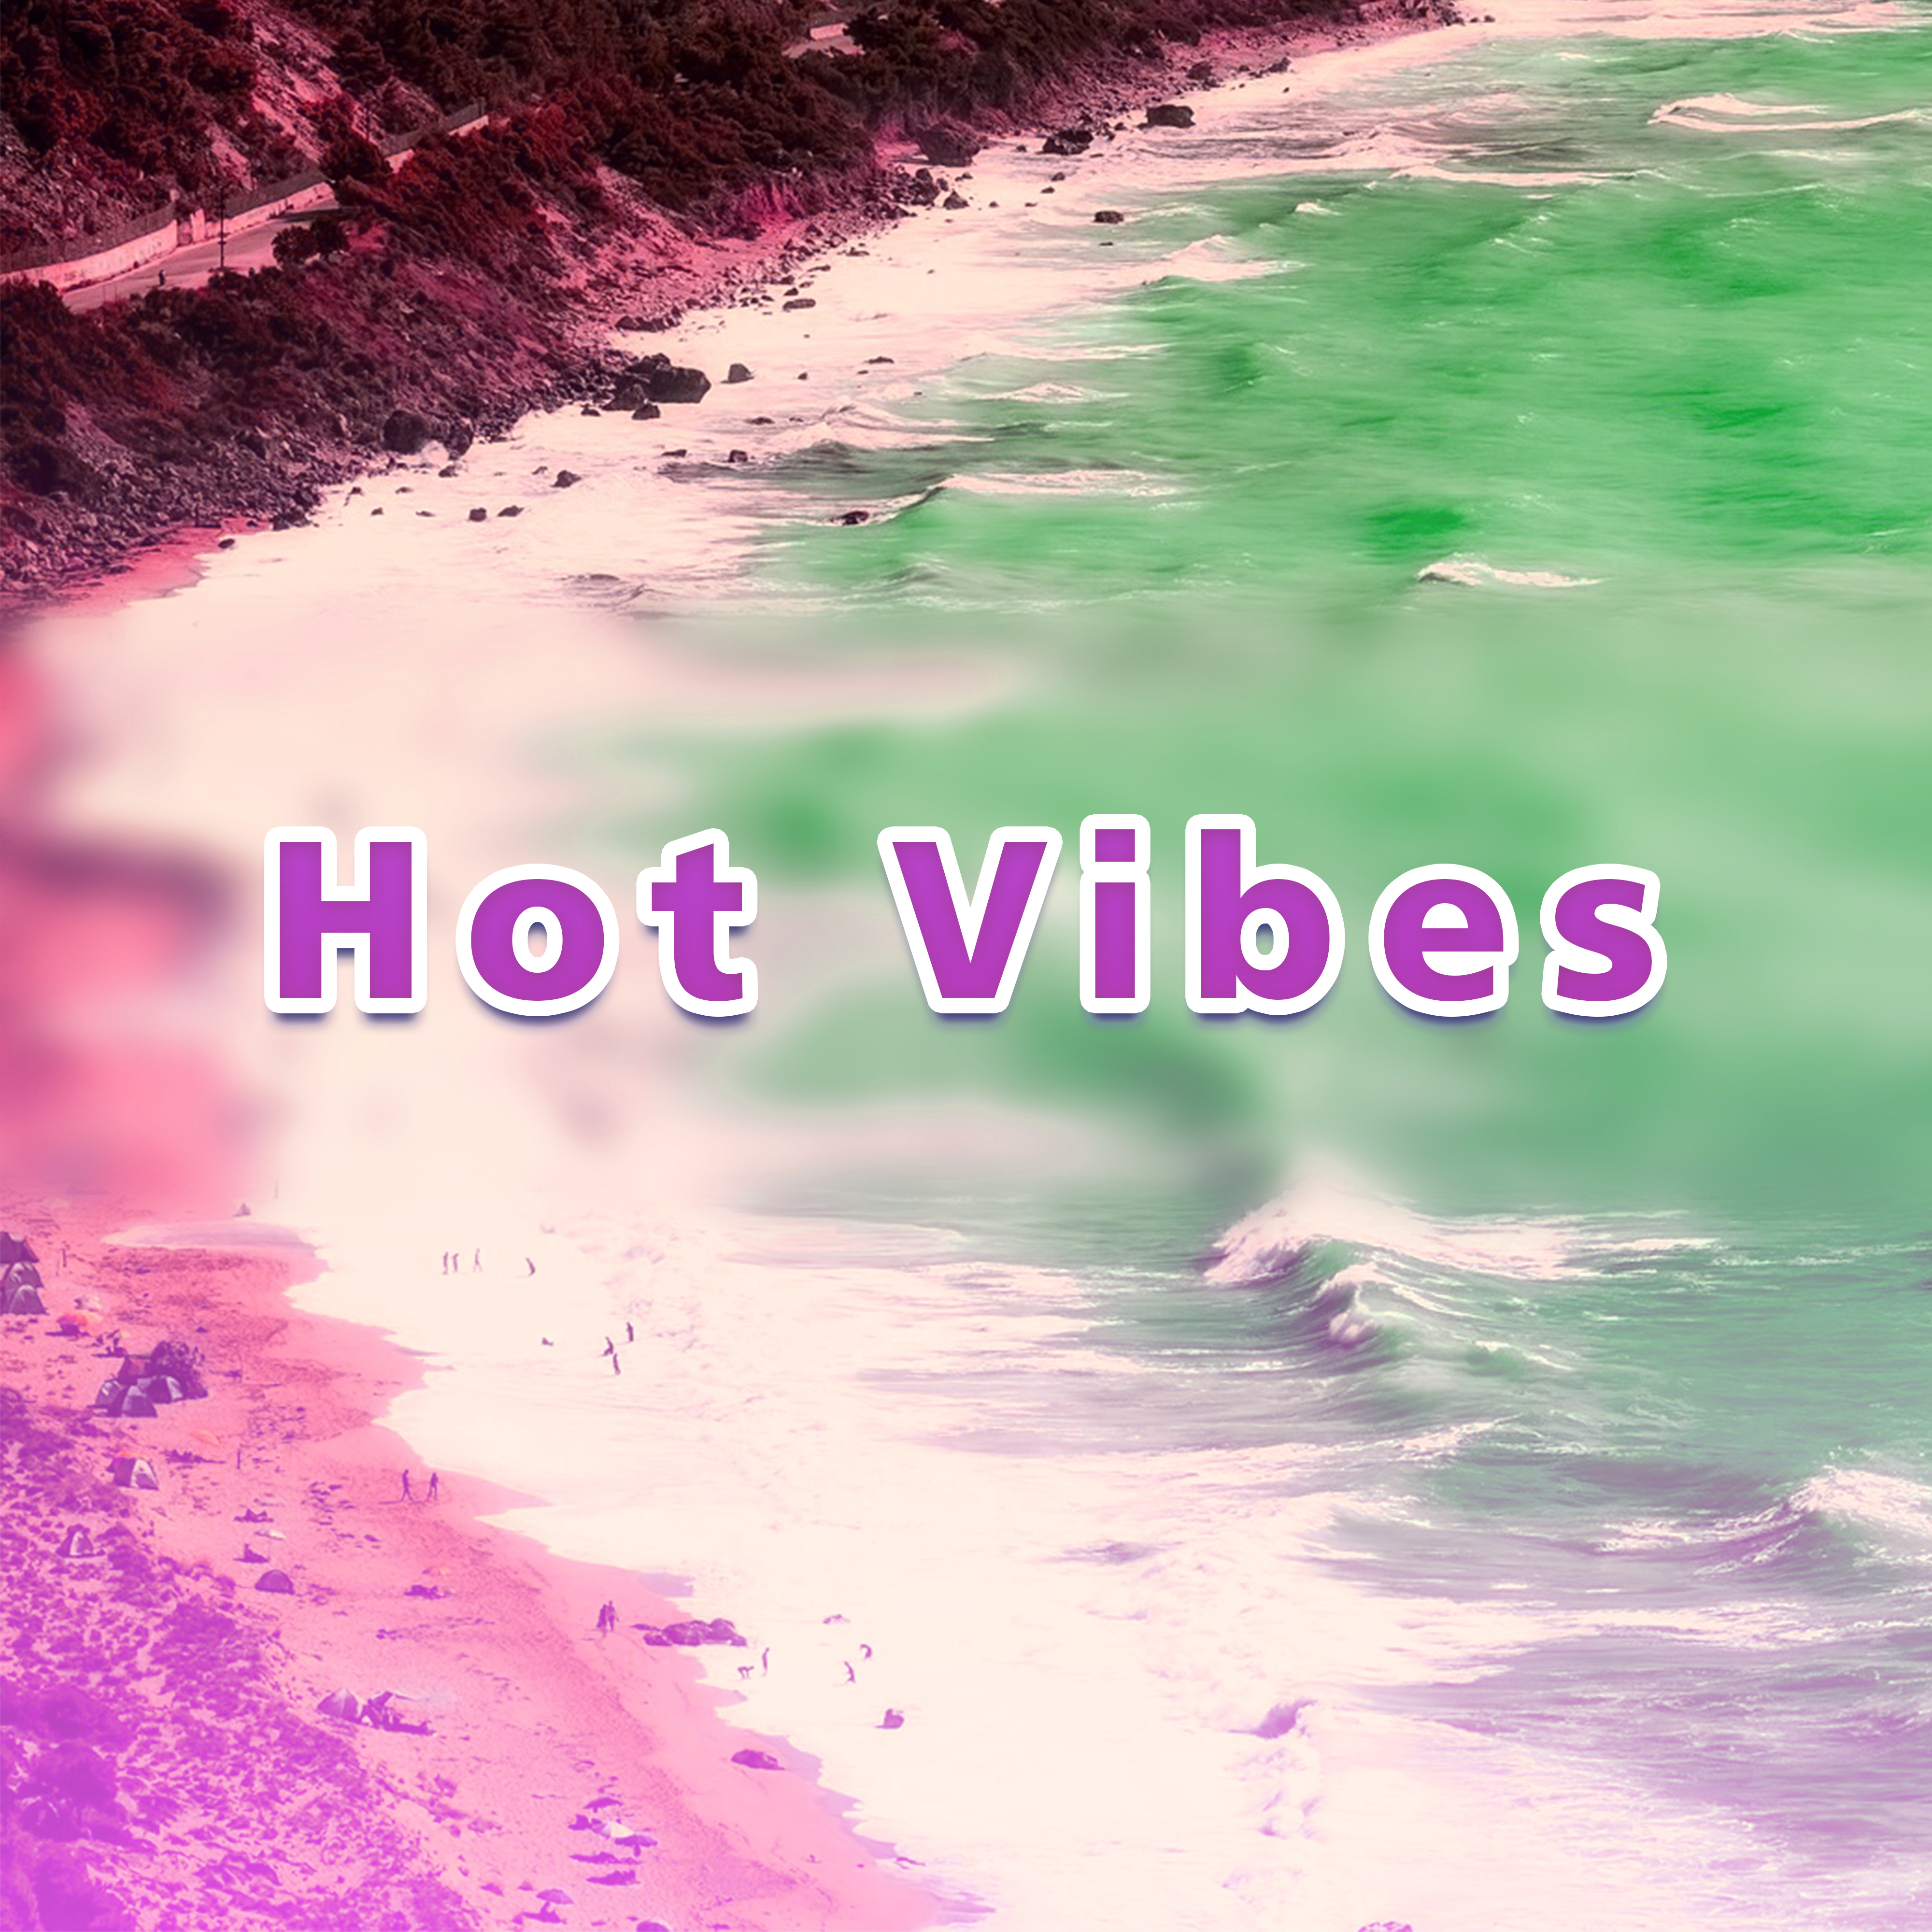 Hot Vibes – Summer Rhythms, Chill Out Beach Vibes, Relaxation Music, Easy Listening